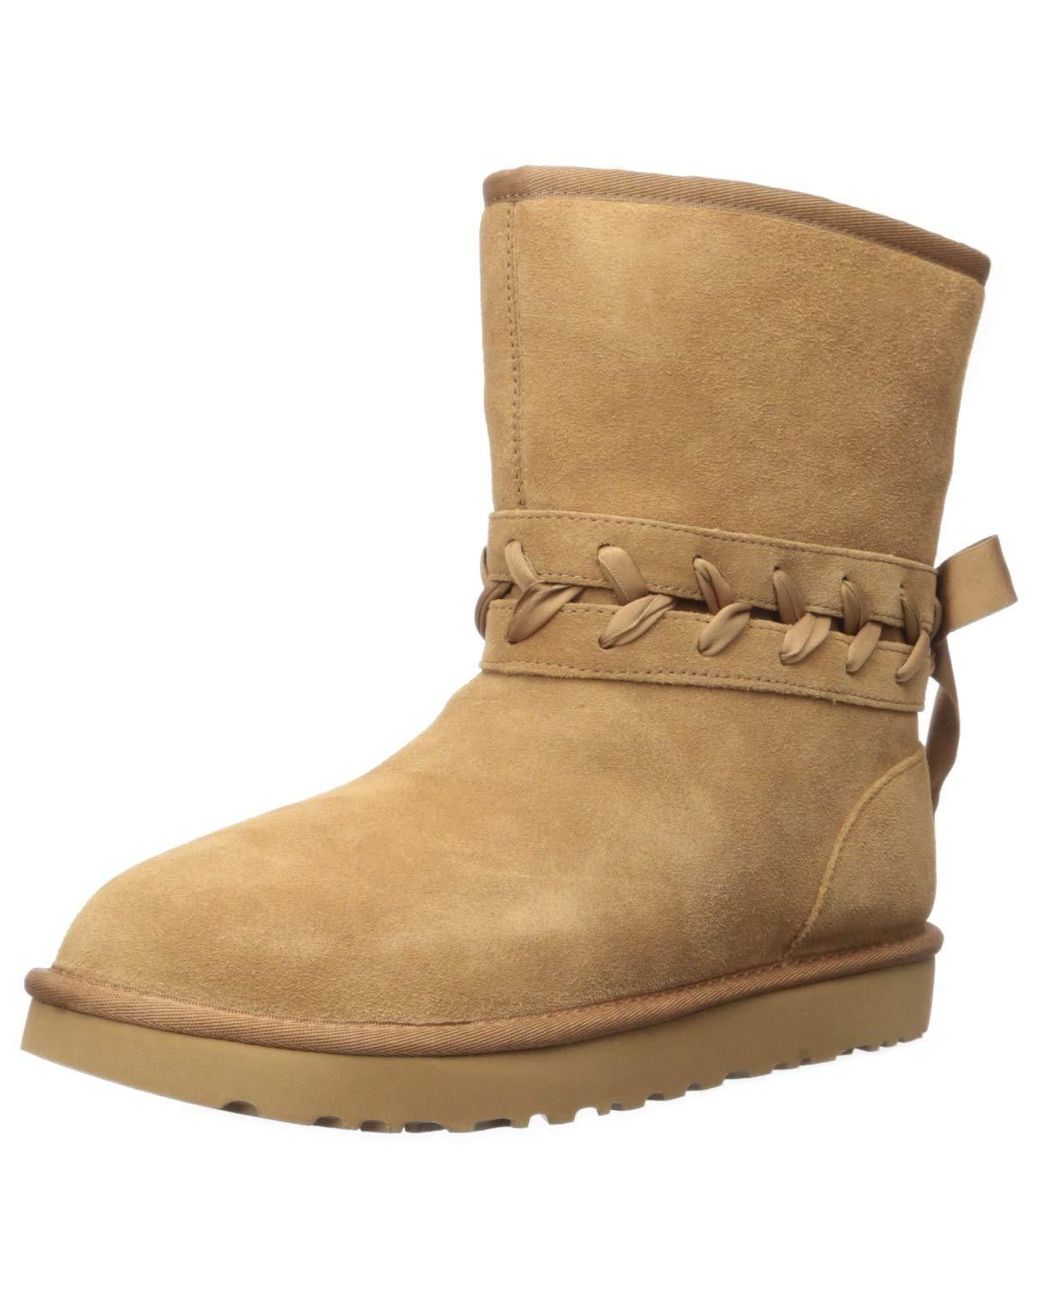 UGG Classic Lace Short Fashion Boot in Chestnut (Brown) - Save 24% - Lyst